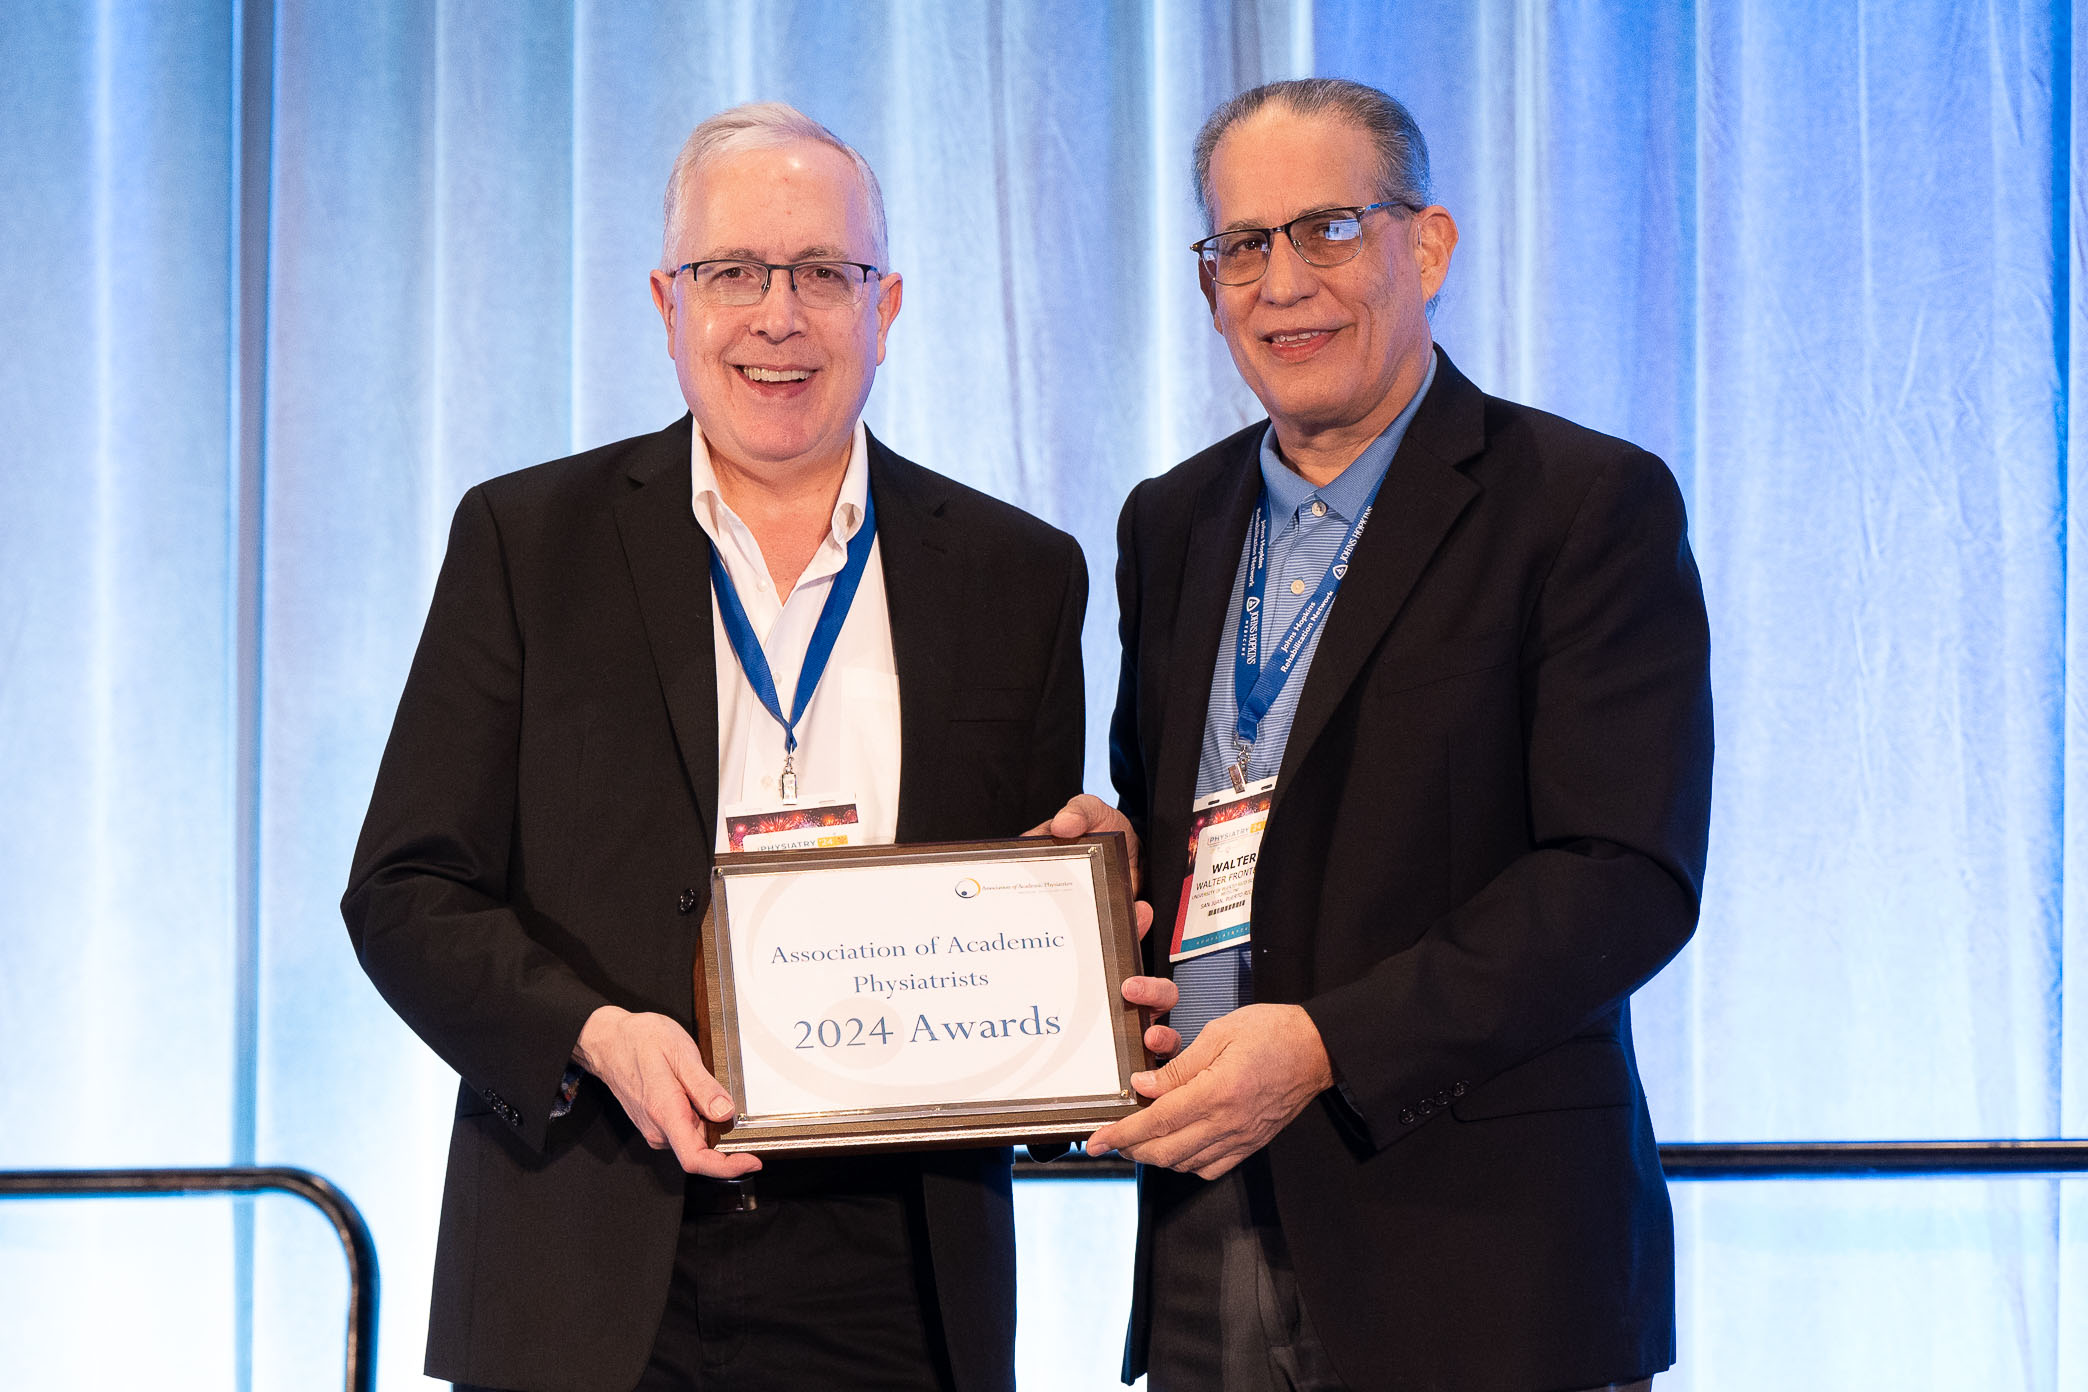 Samuel Bierner &lpar;at left&rpar;&comma; MD&comma; was honored at the Association of Academic Physiatrists Annual Meeting&period;